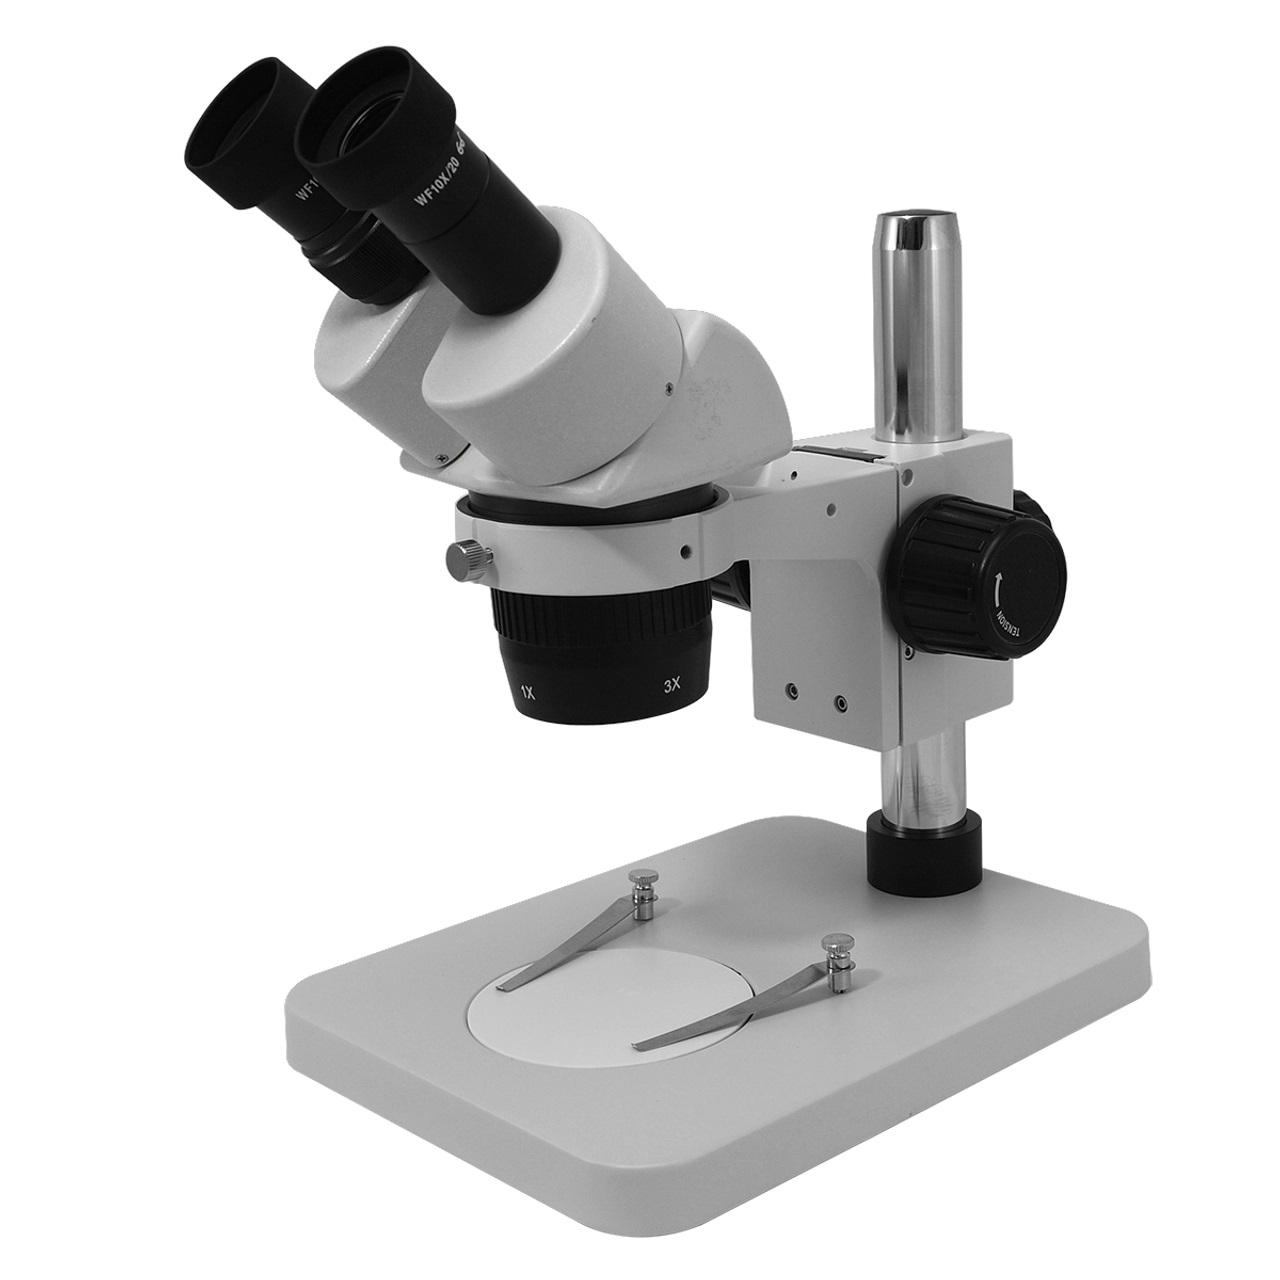 Standard Stereo Microscope - 30X Magnification